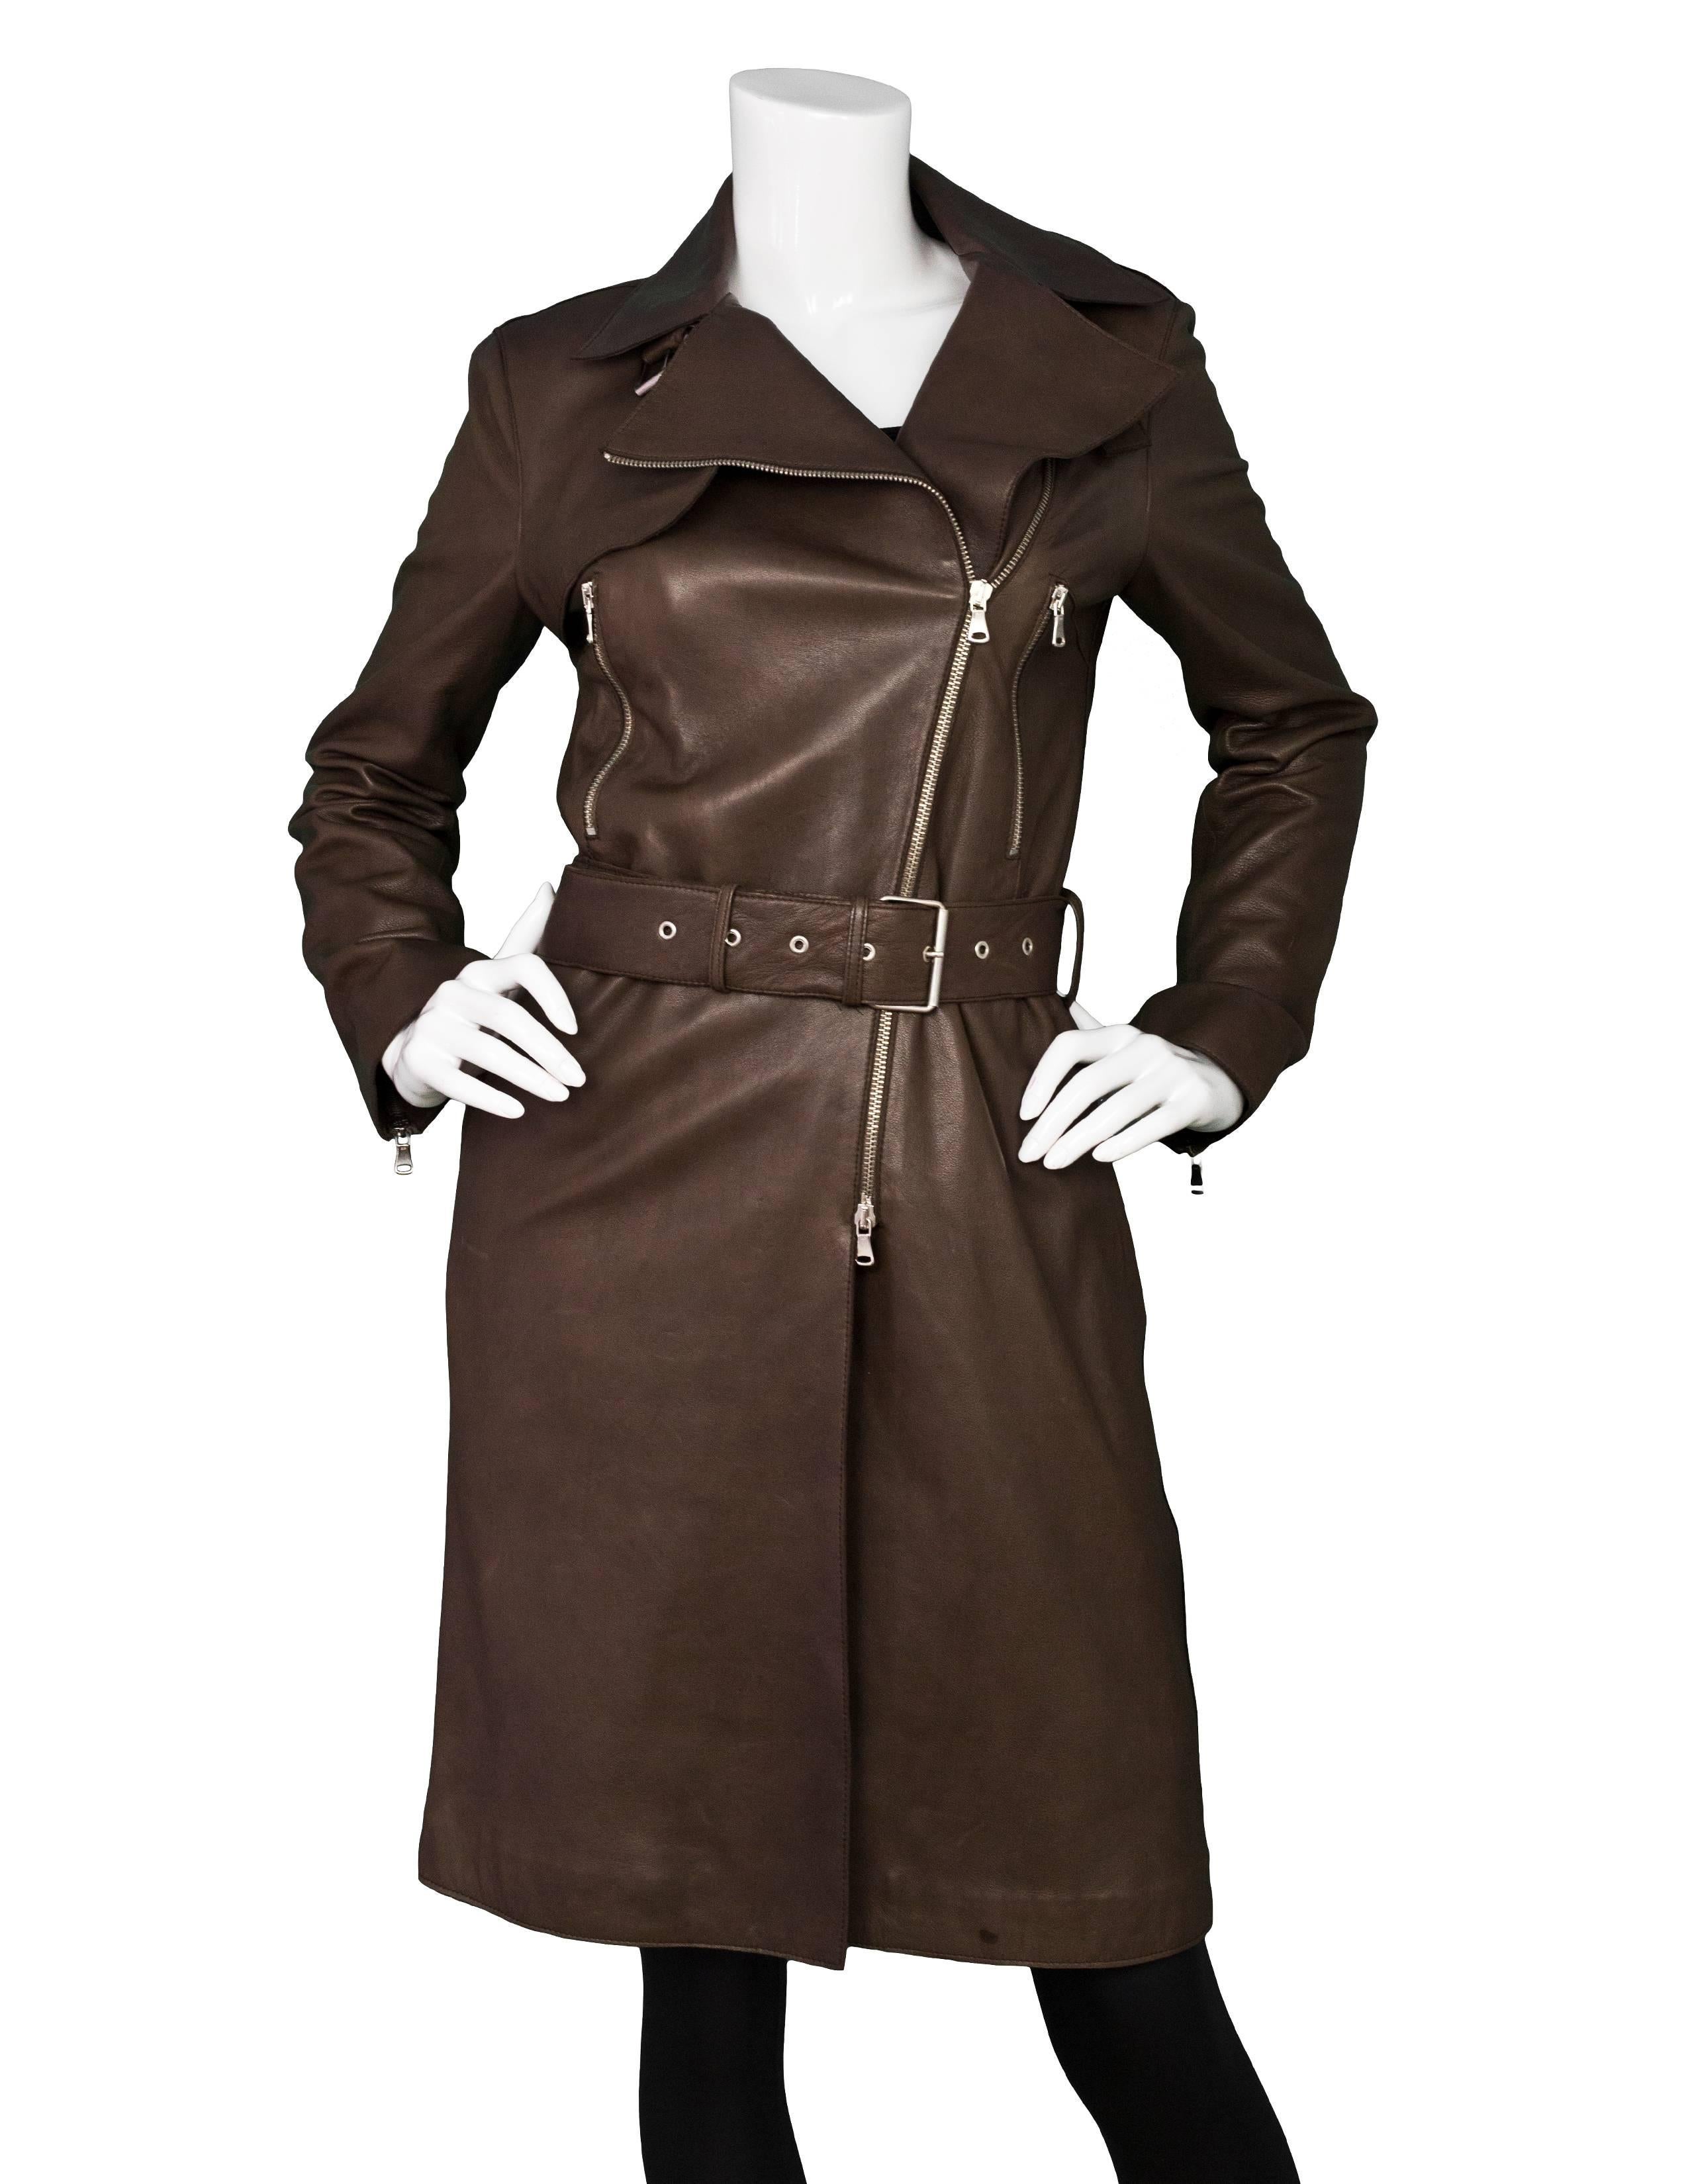 Joseph Brown Leather Moto Trench Coat Sz FR36

Made In: Italy
Color: Brown
Composition: 100% lambskin
Lining: Charcoal textile
Closure/Opening: Double zip front
Overall Condition: Very good pre-owned condition with the exception of some marks